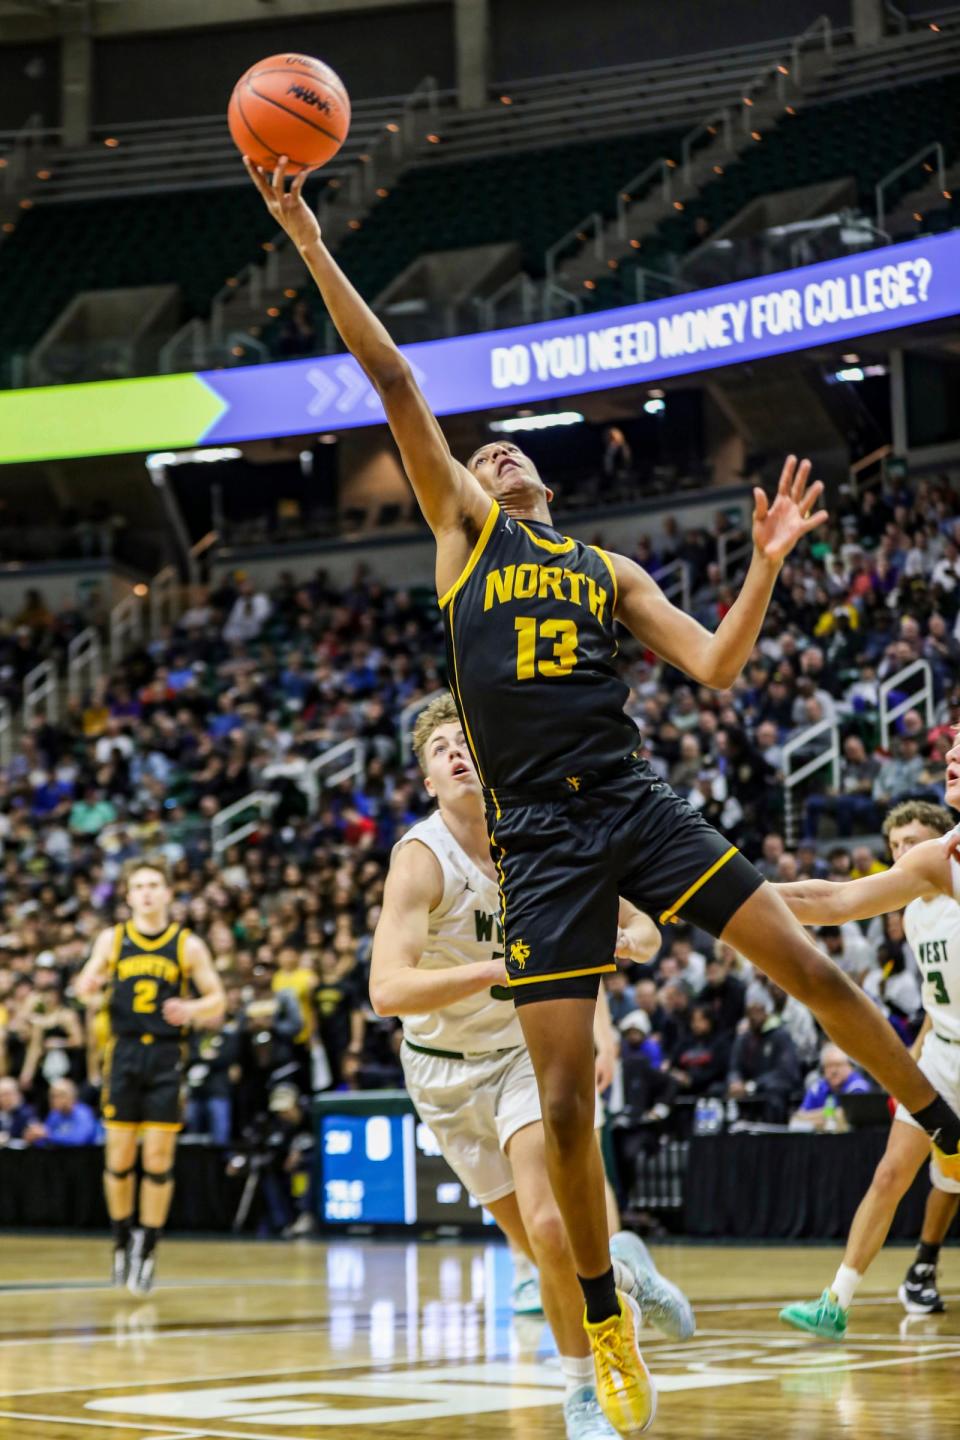 North Farmington’s Dylan Smith gets the rebound and scores against Zeeland West during North Farmington's 58-39 win in the MHSAA Division 1 boys basketball semifinals on Friday, March 15, 2024, at Breslin Center.